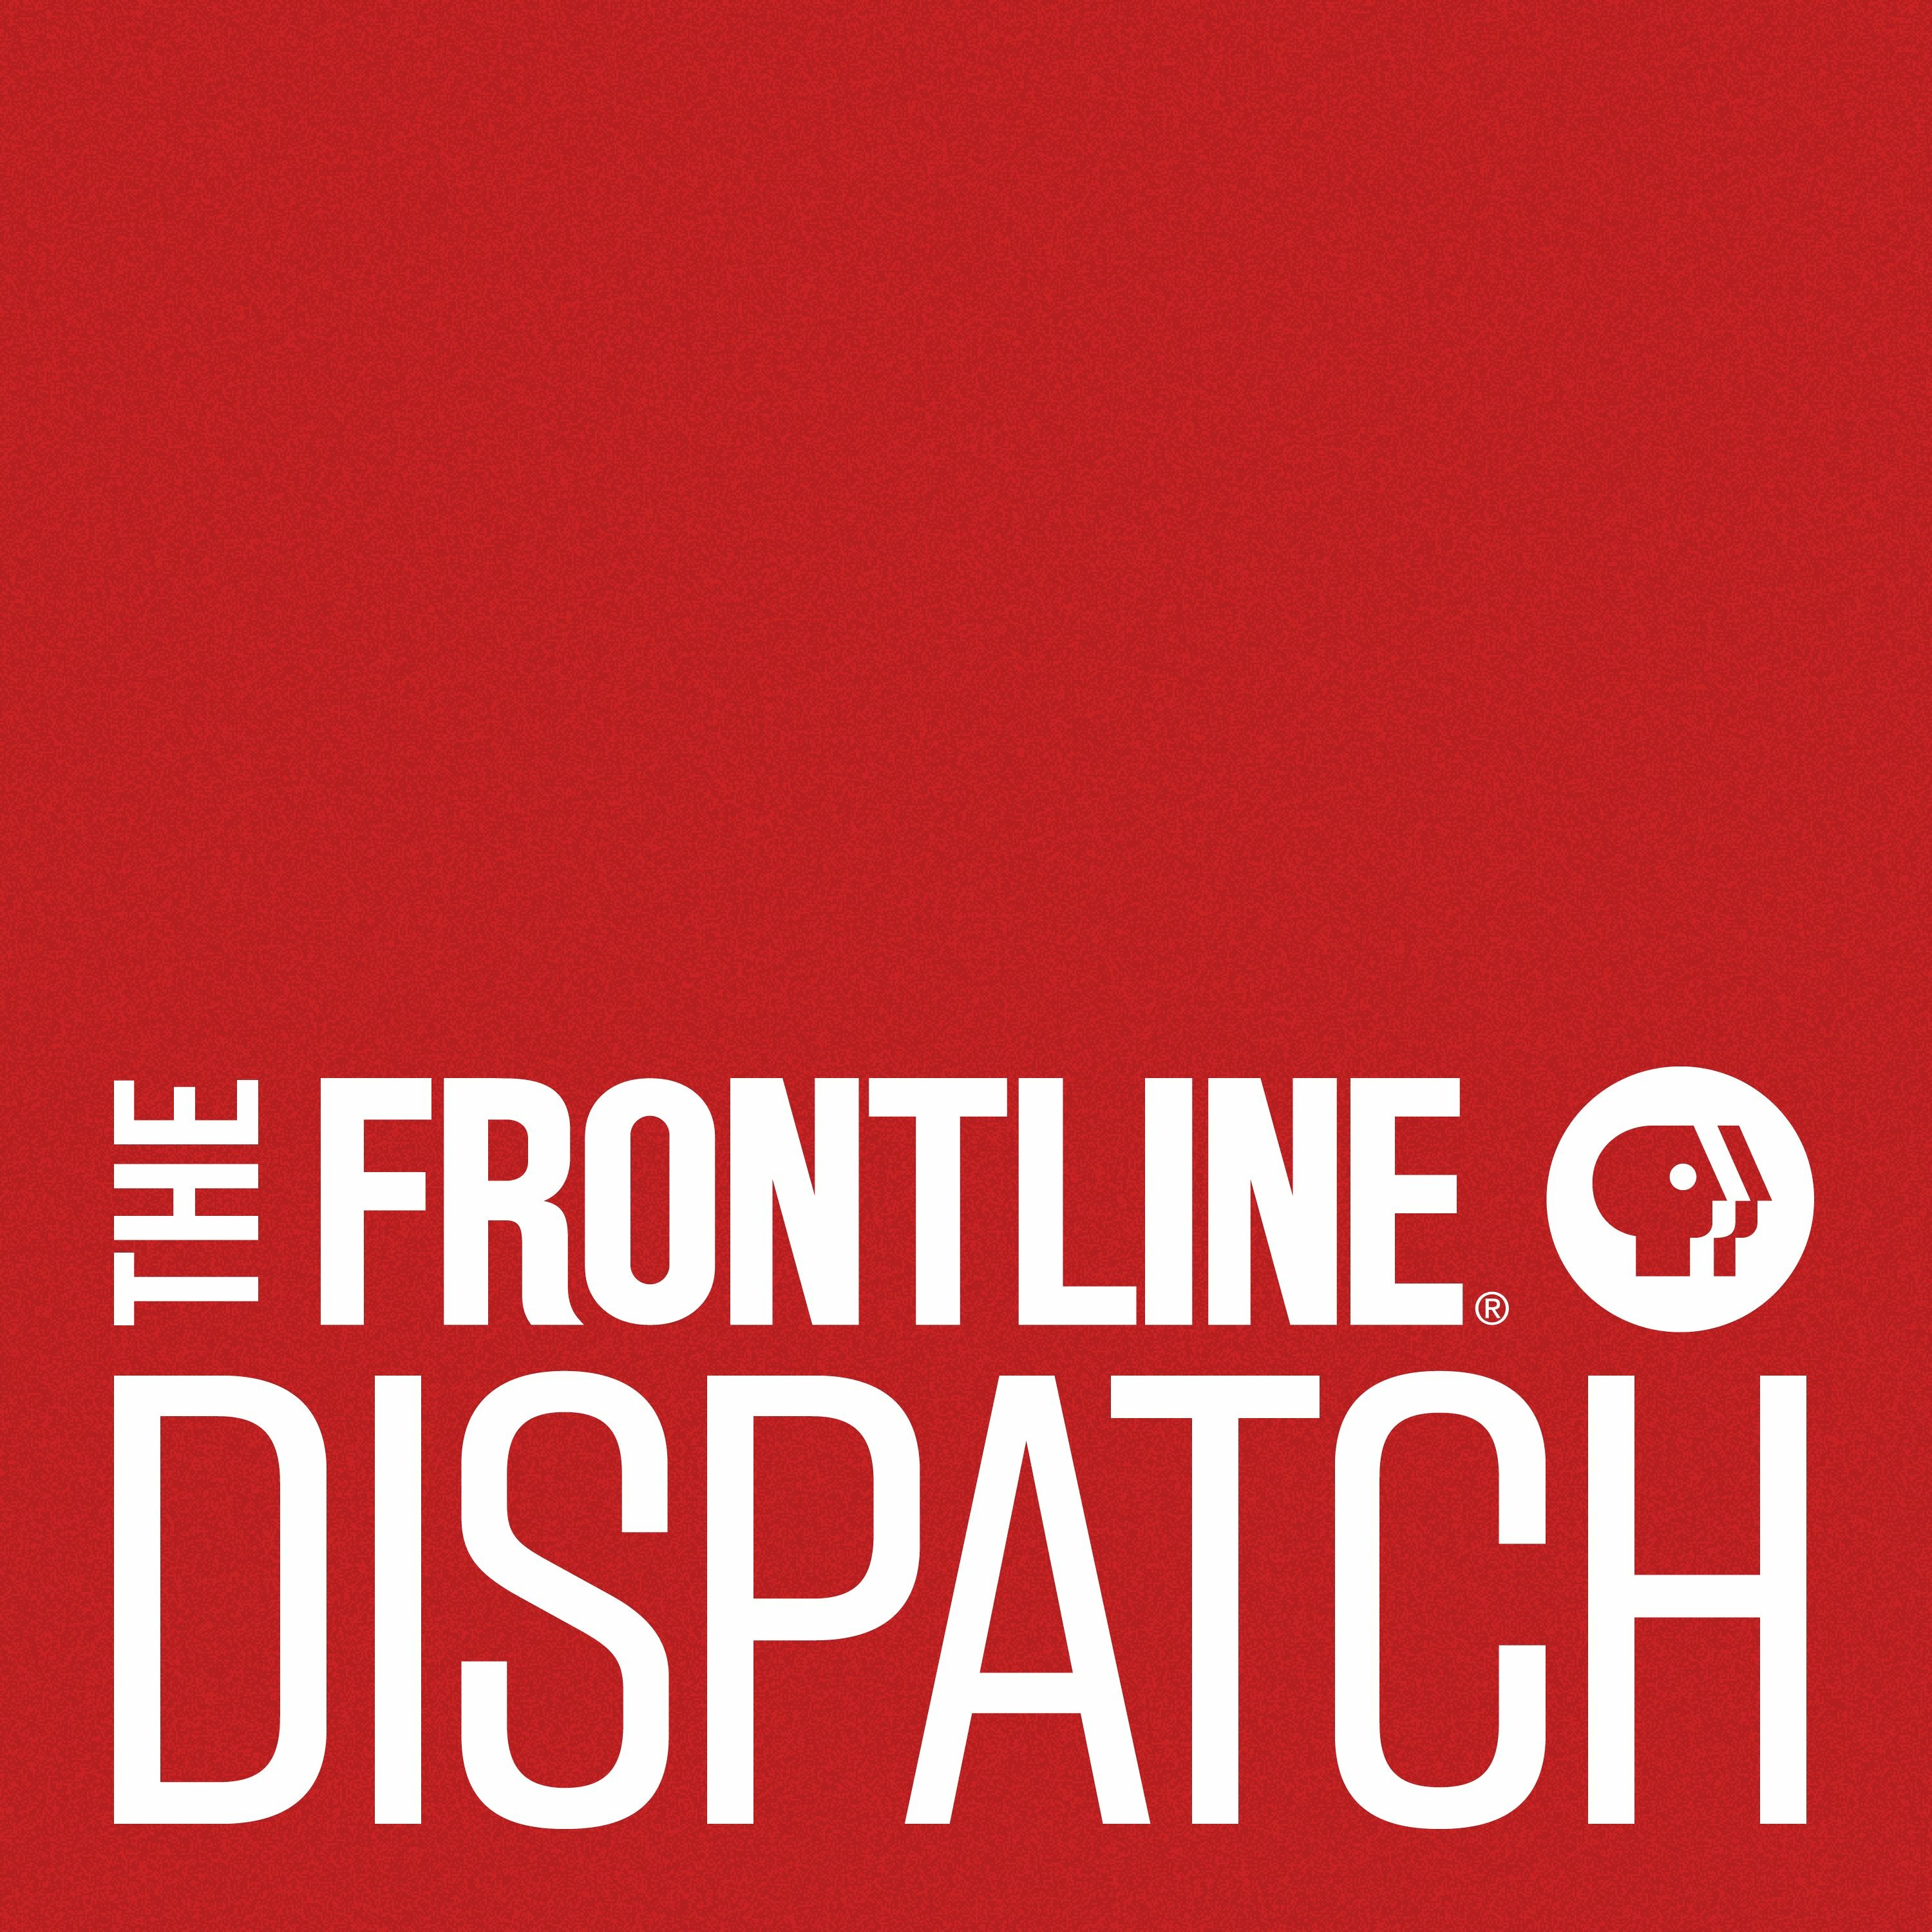 Introducing The FRONTLINE Dispatch